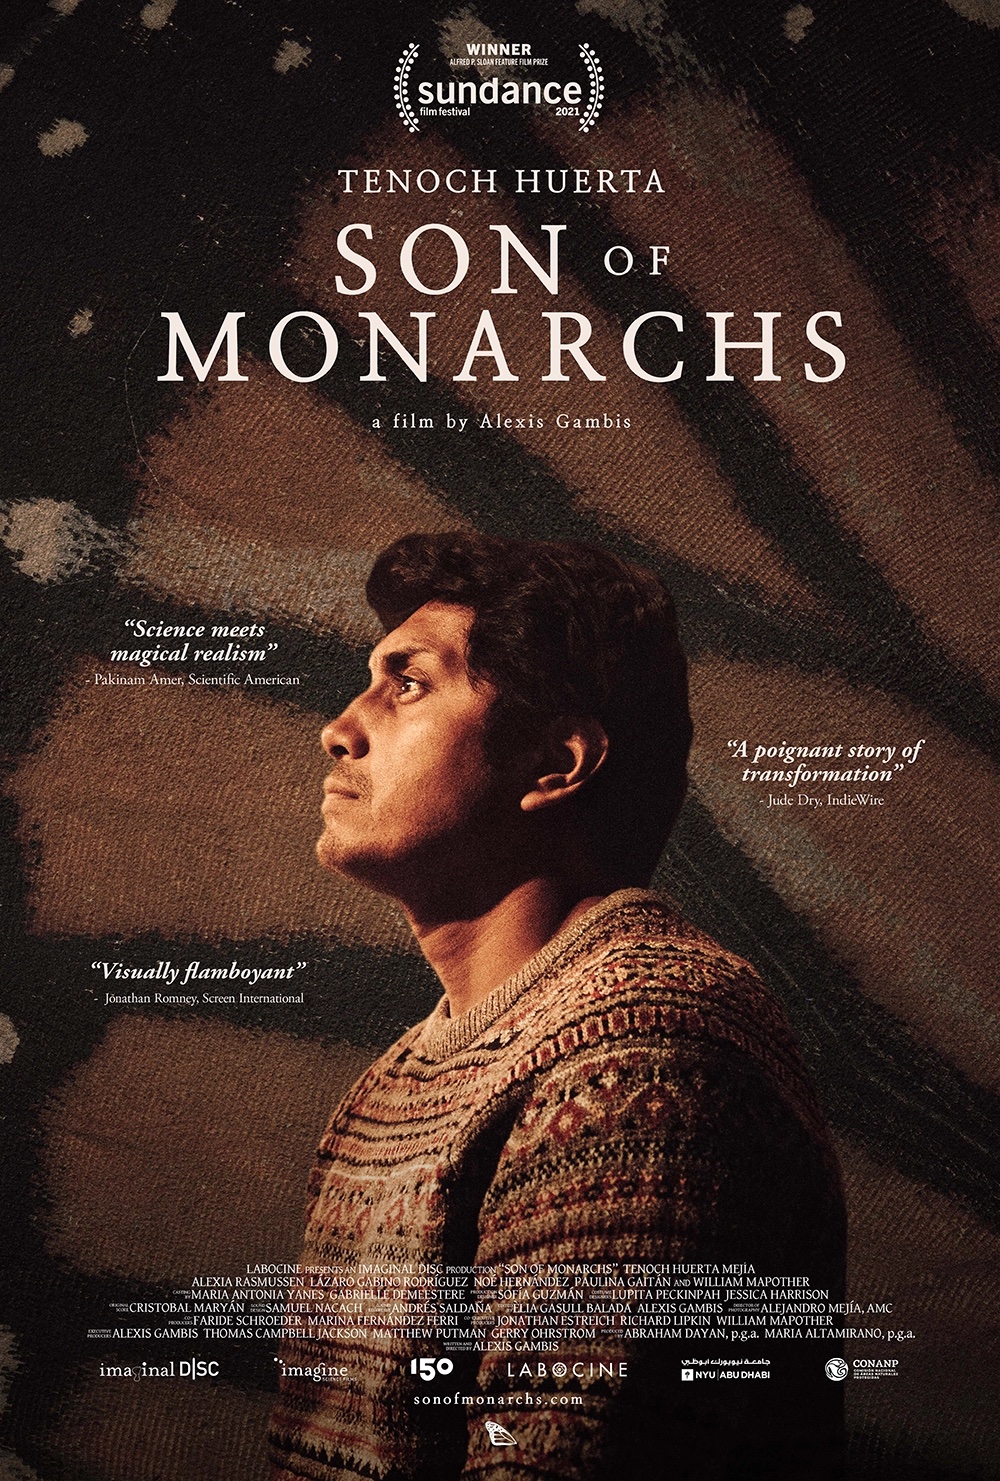 ‘Son of Monarchs’ poster